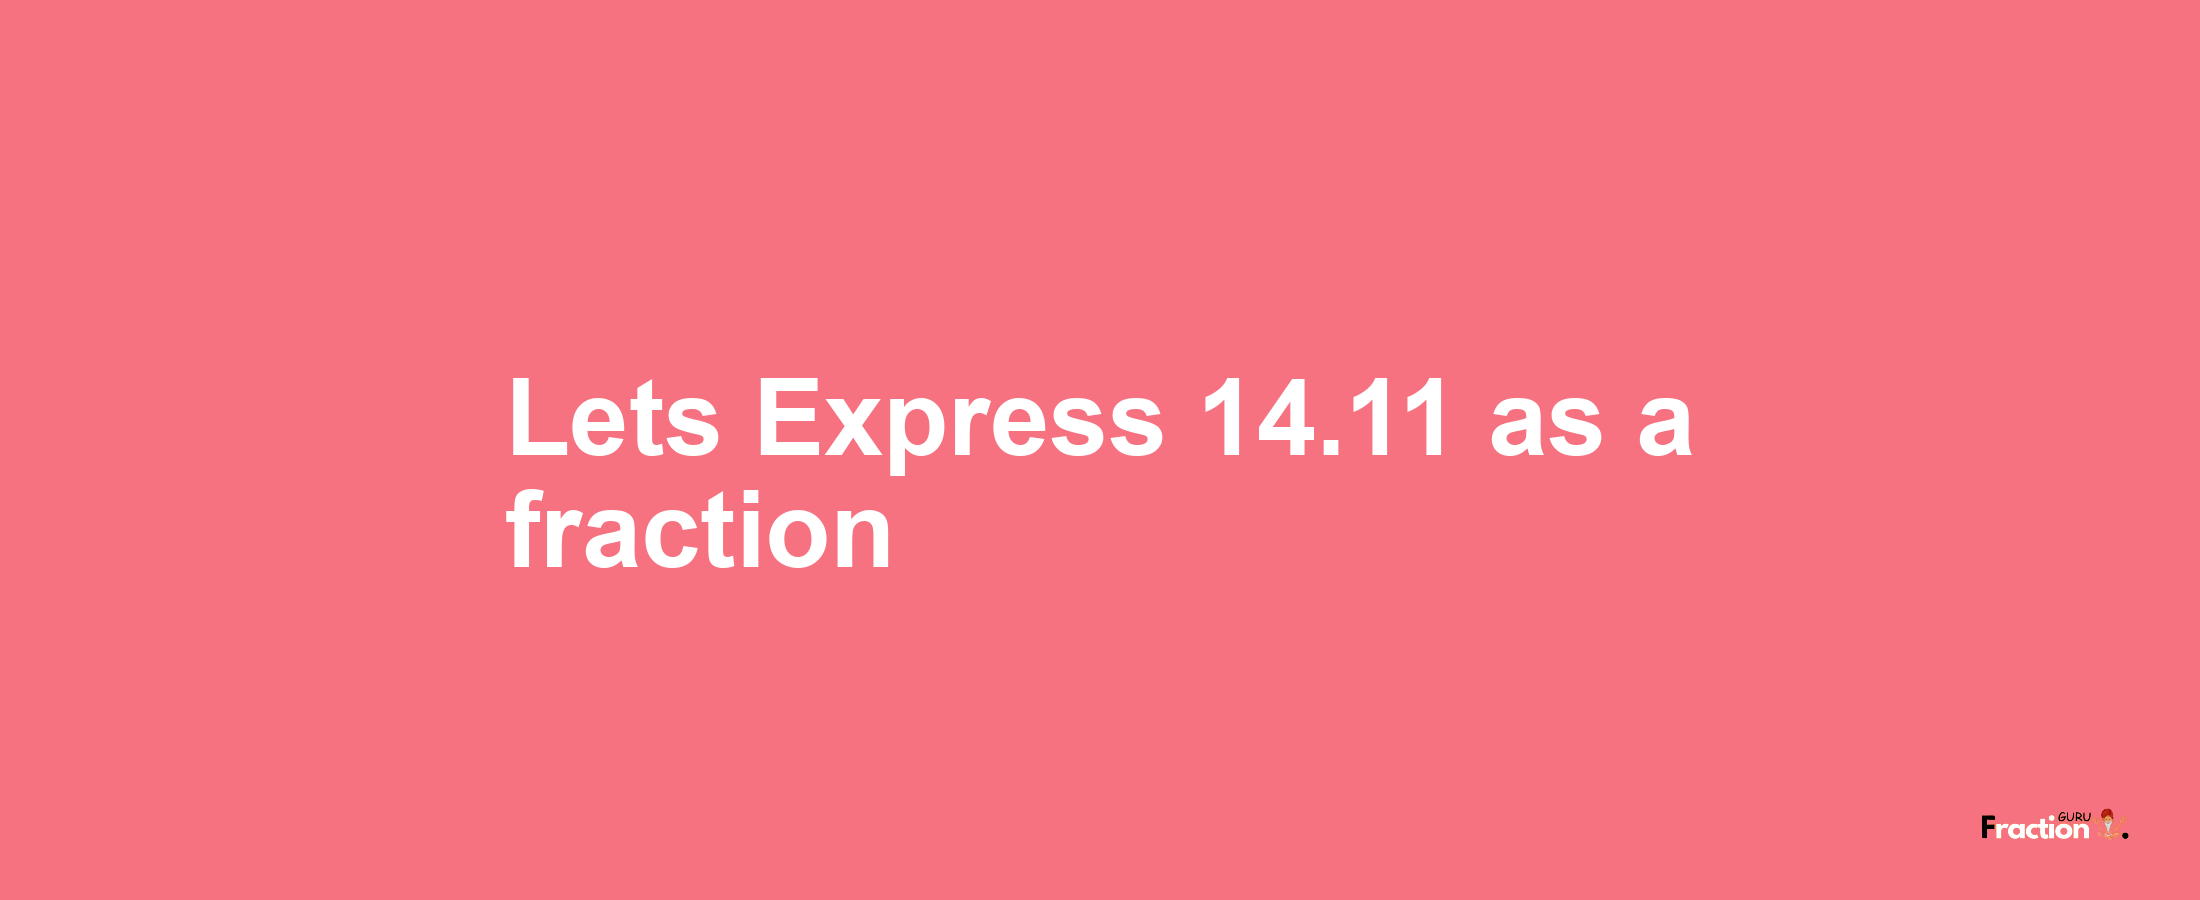 Lets Express 14.11 as afraction